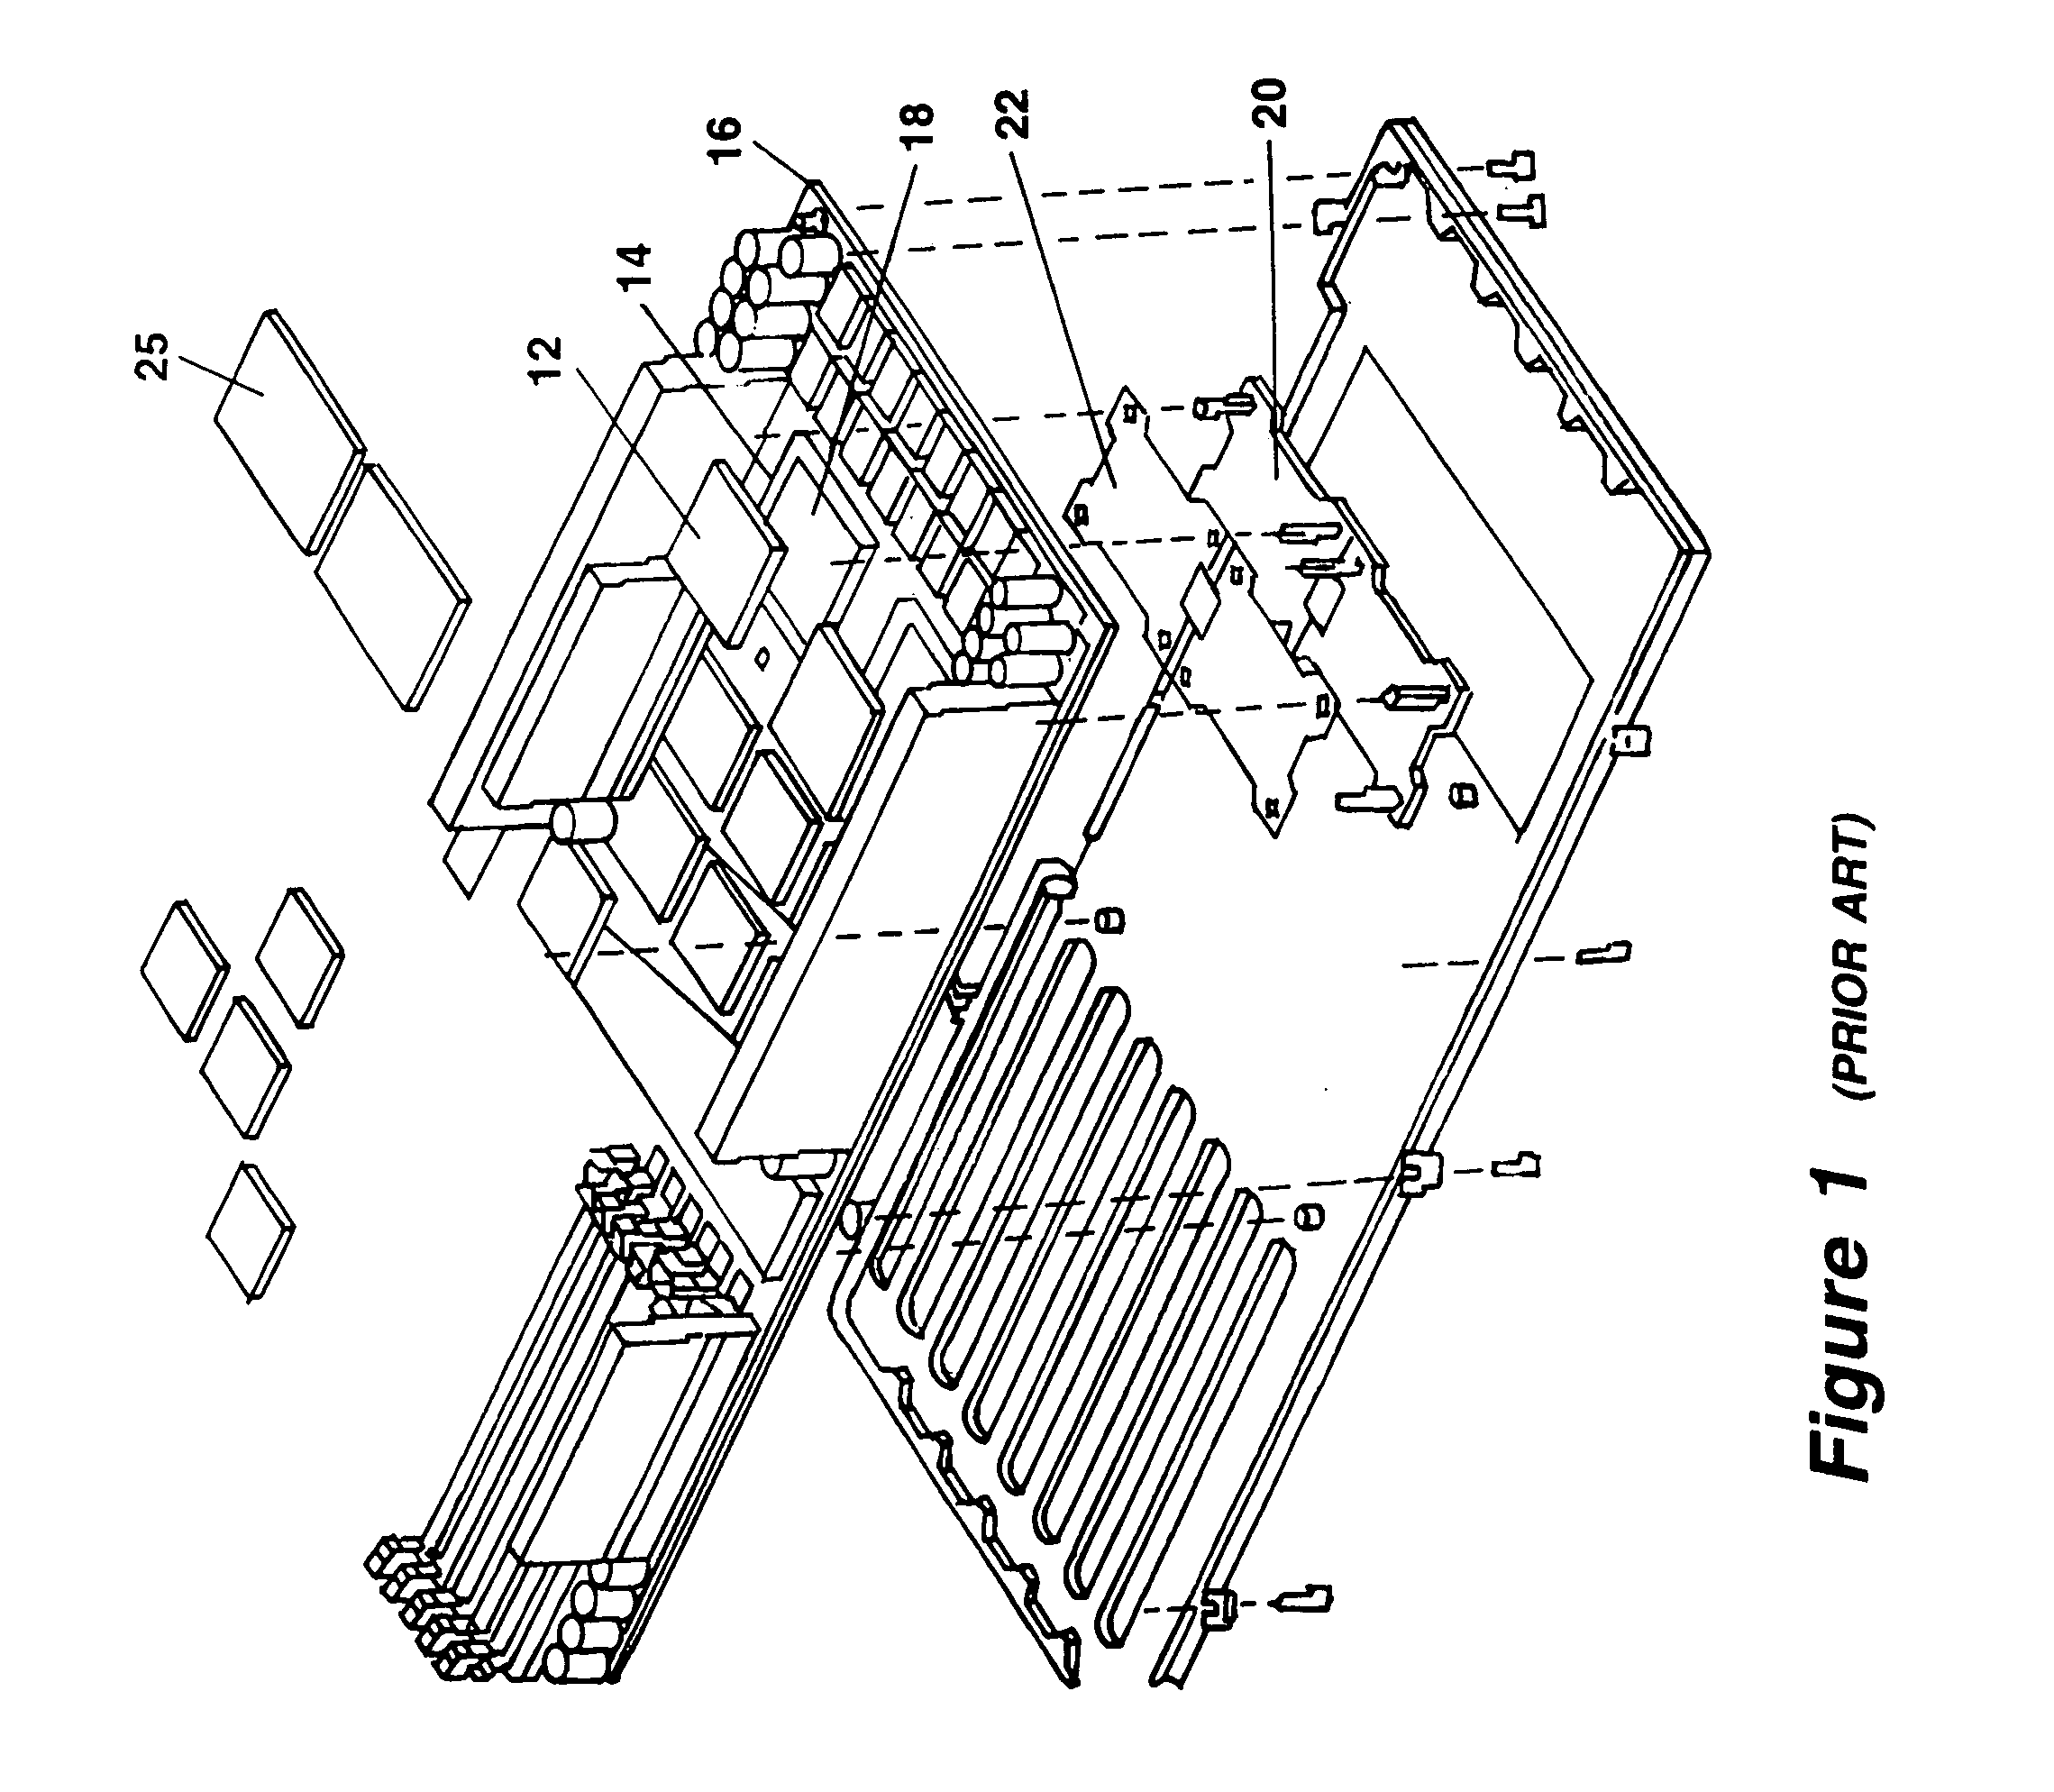 Method and apparatus for reducing capacitively coupled radio frequency energy between a semiconductor device and an adjacent metal structure